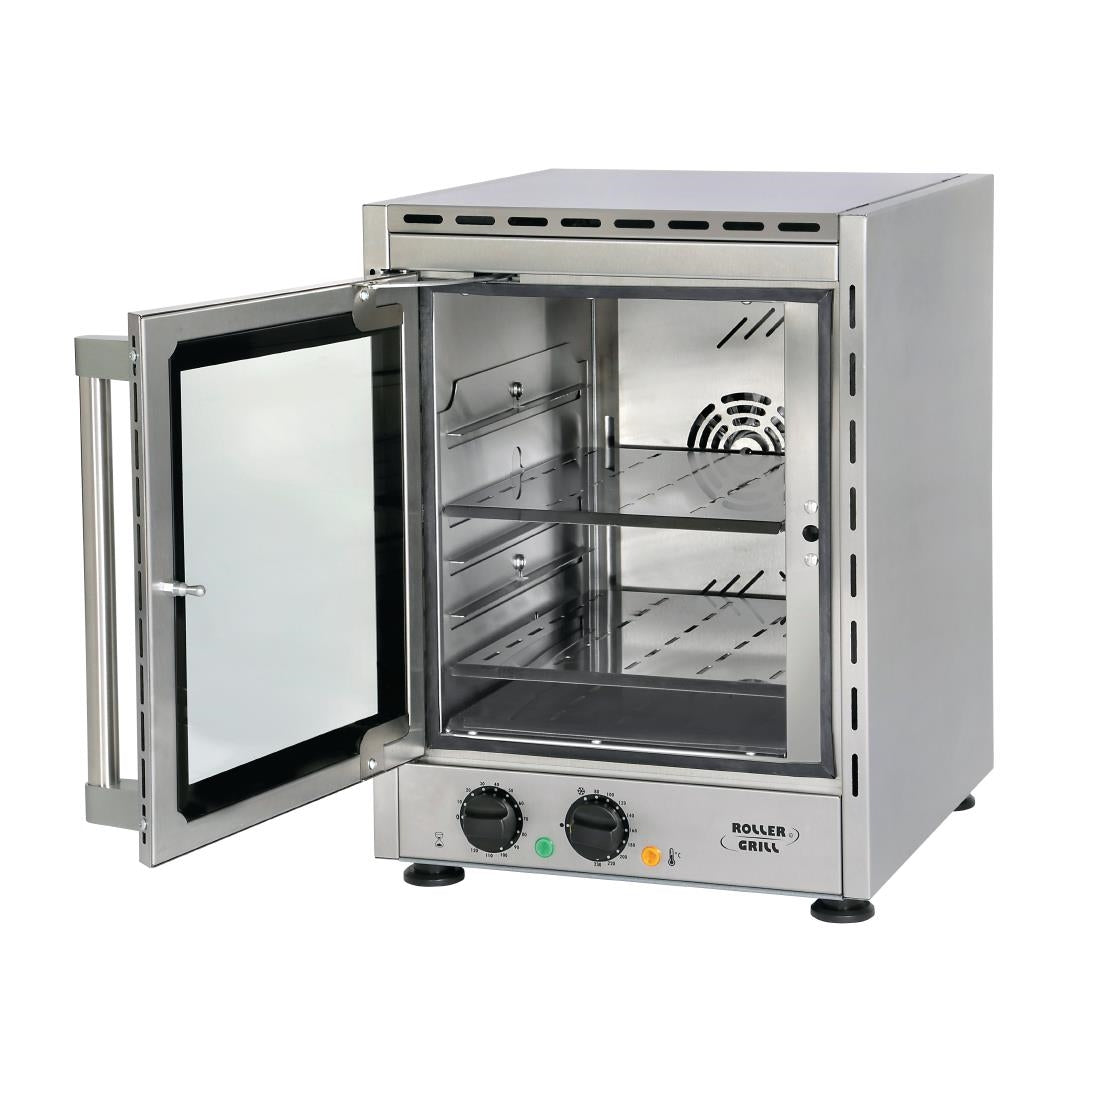 GP319 Roller Grill Convection Oven FCV280